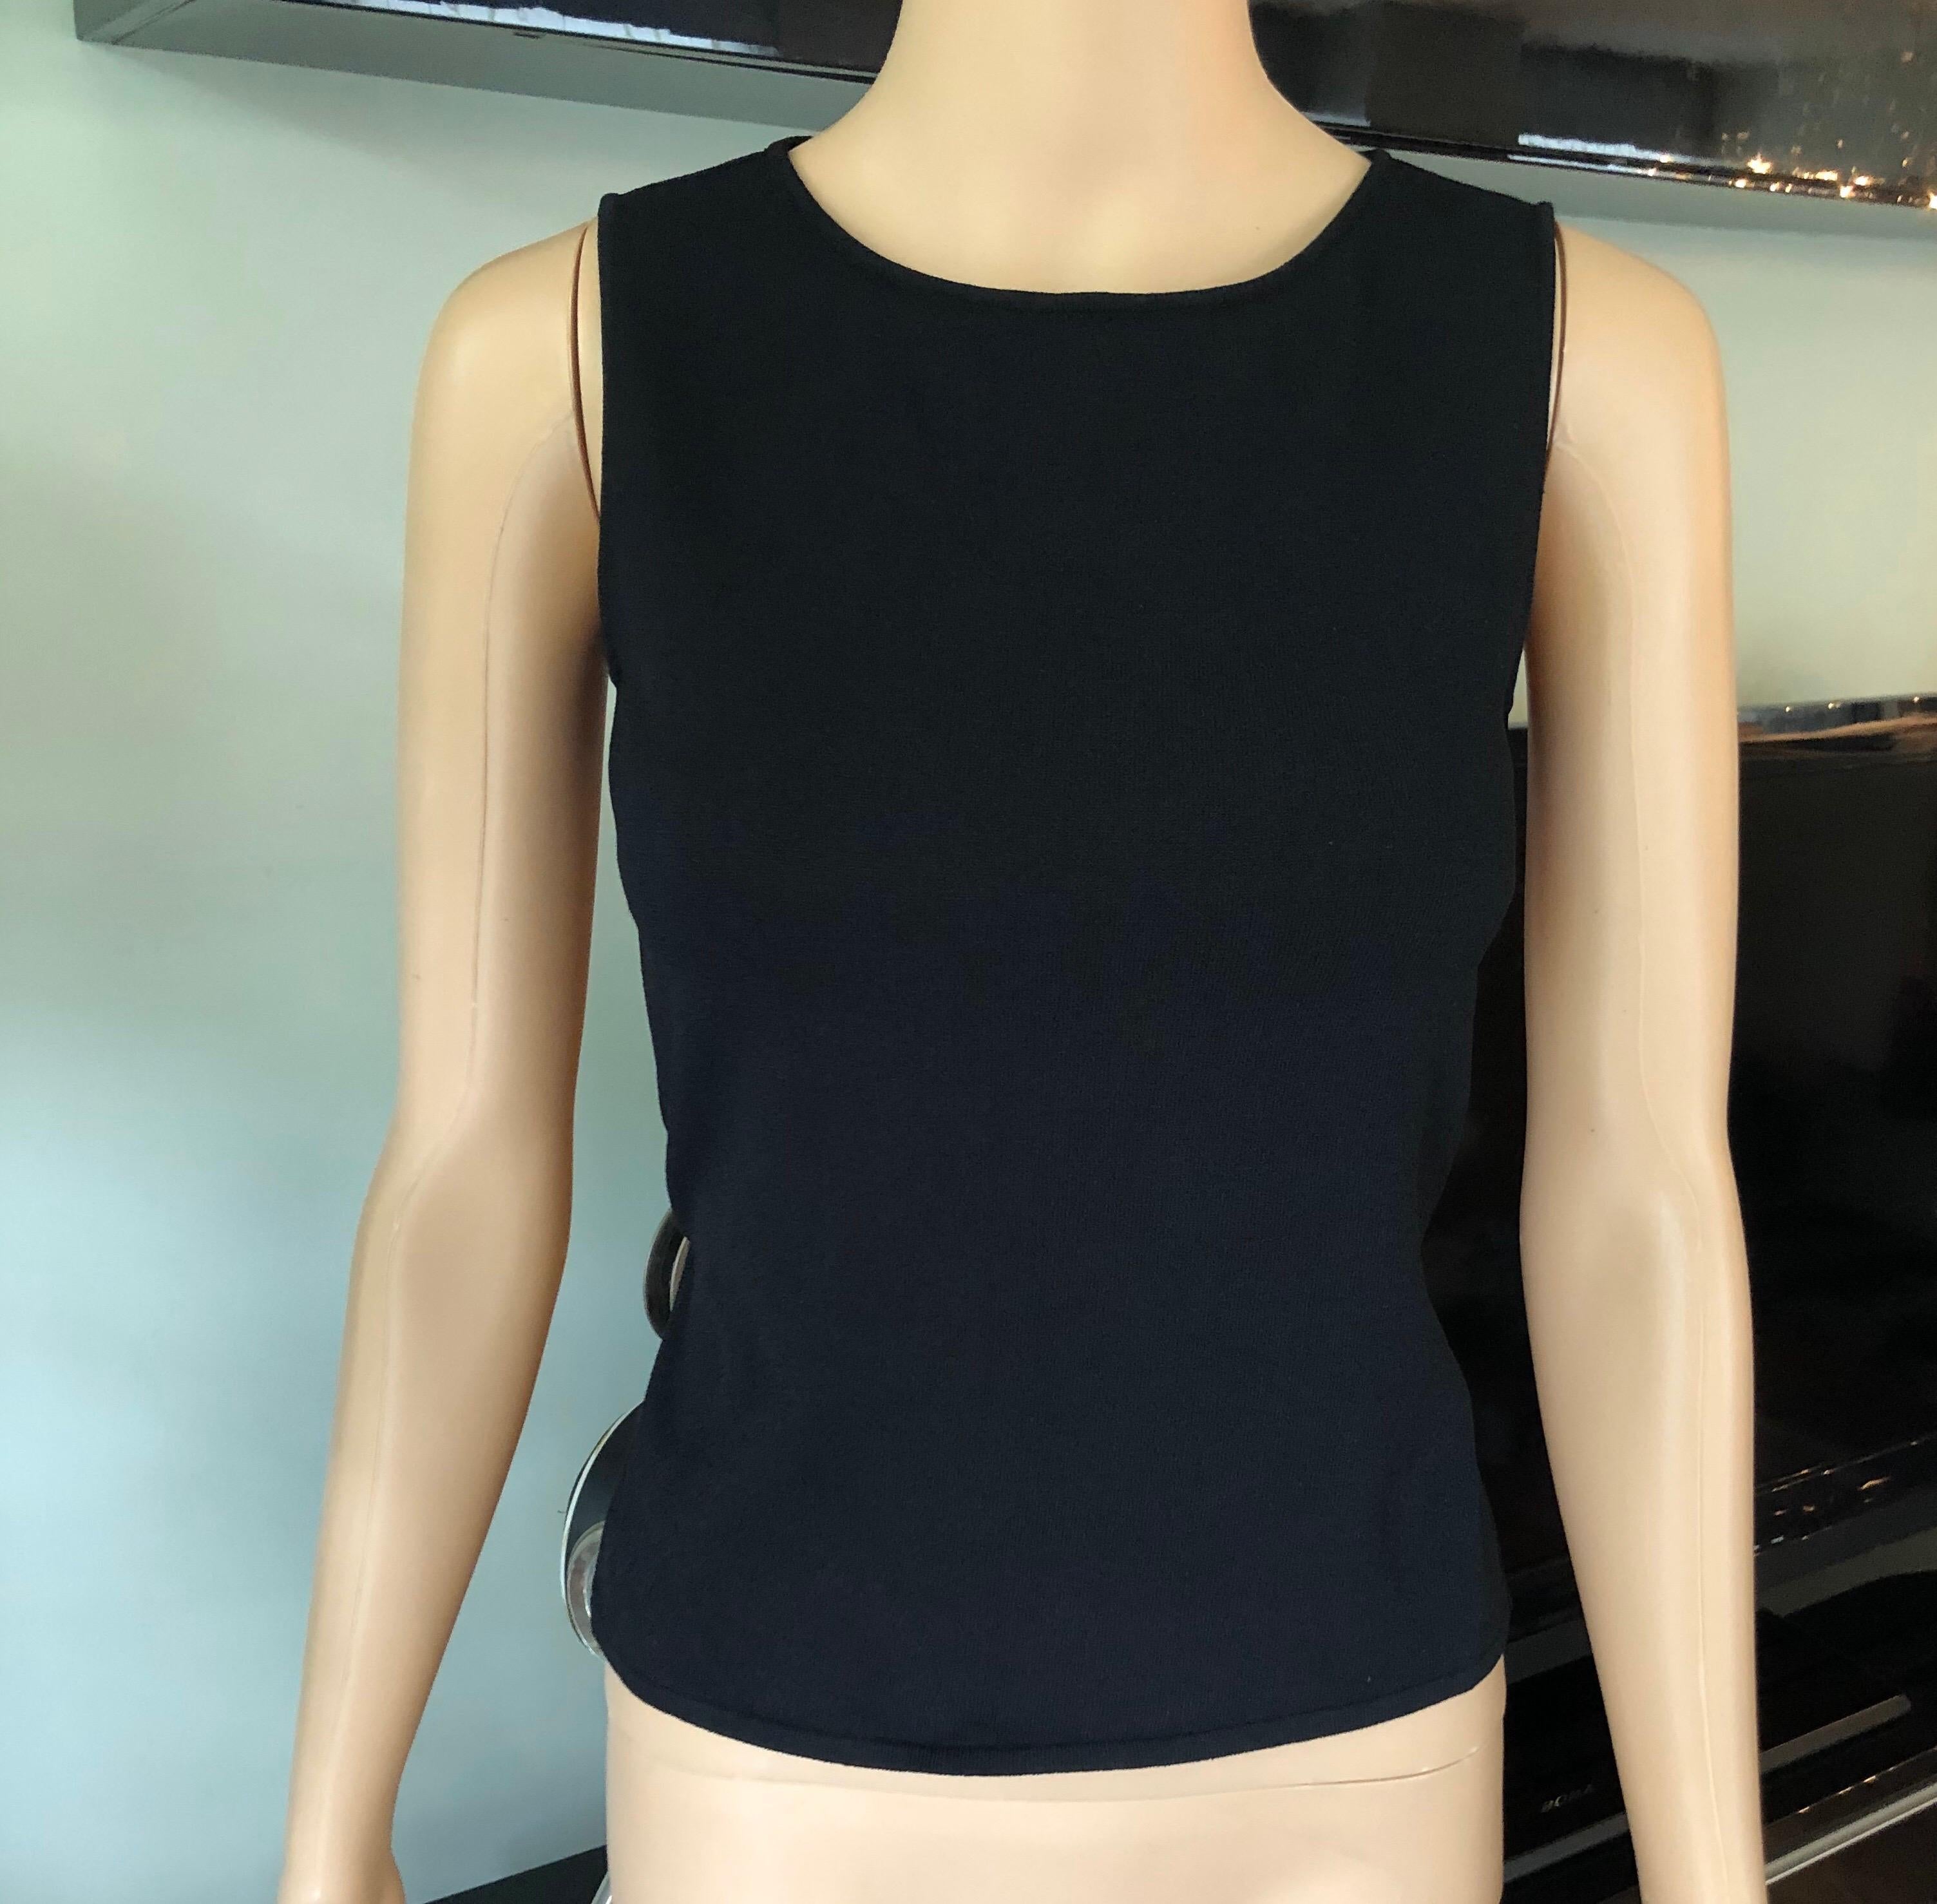 Gucci by Tom Ford c.1999 Knit Strappy Backless Logo Buckle Black Crop Top Size Small

Gucci knit crop top with crew neck, straps at back and silver-toned metal logo buckle at nape.
Excellent Condition.